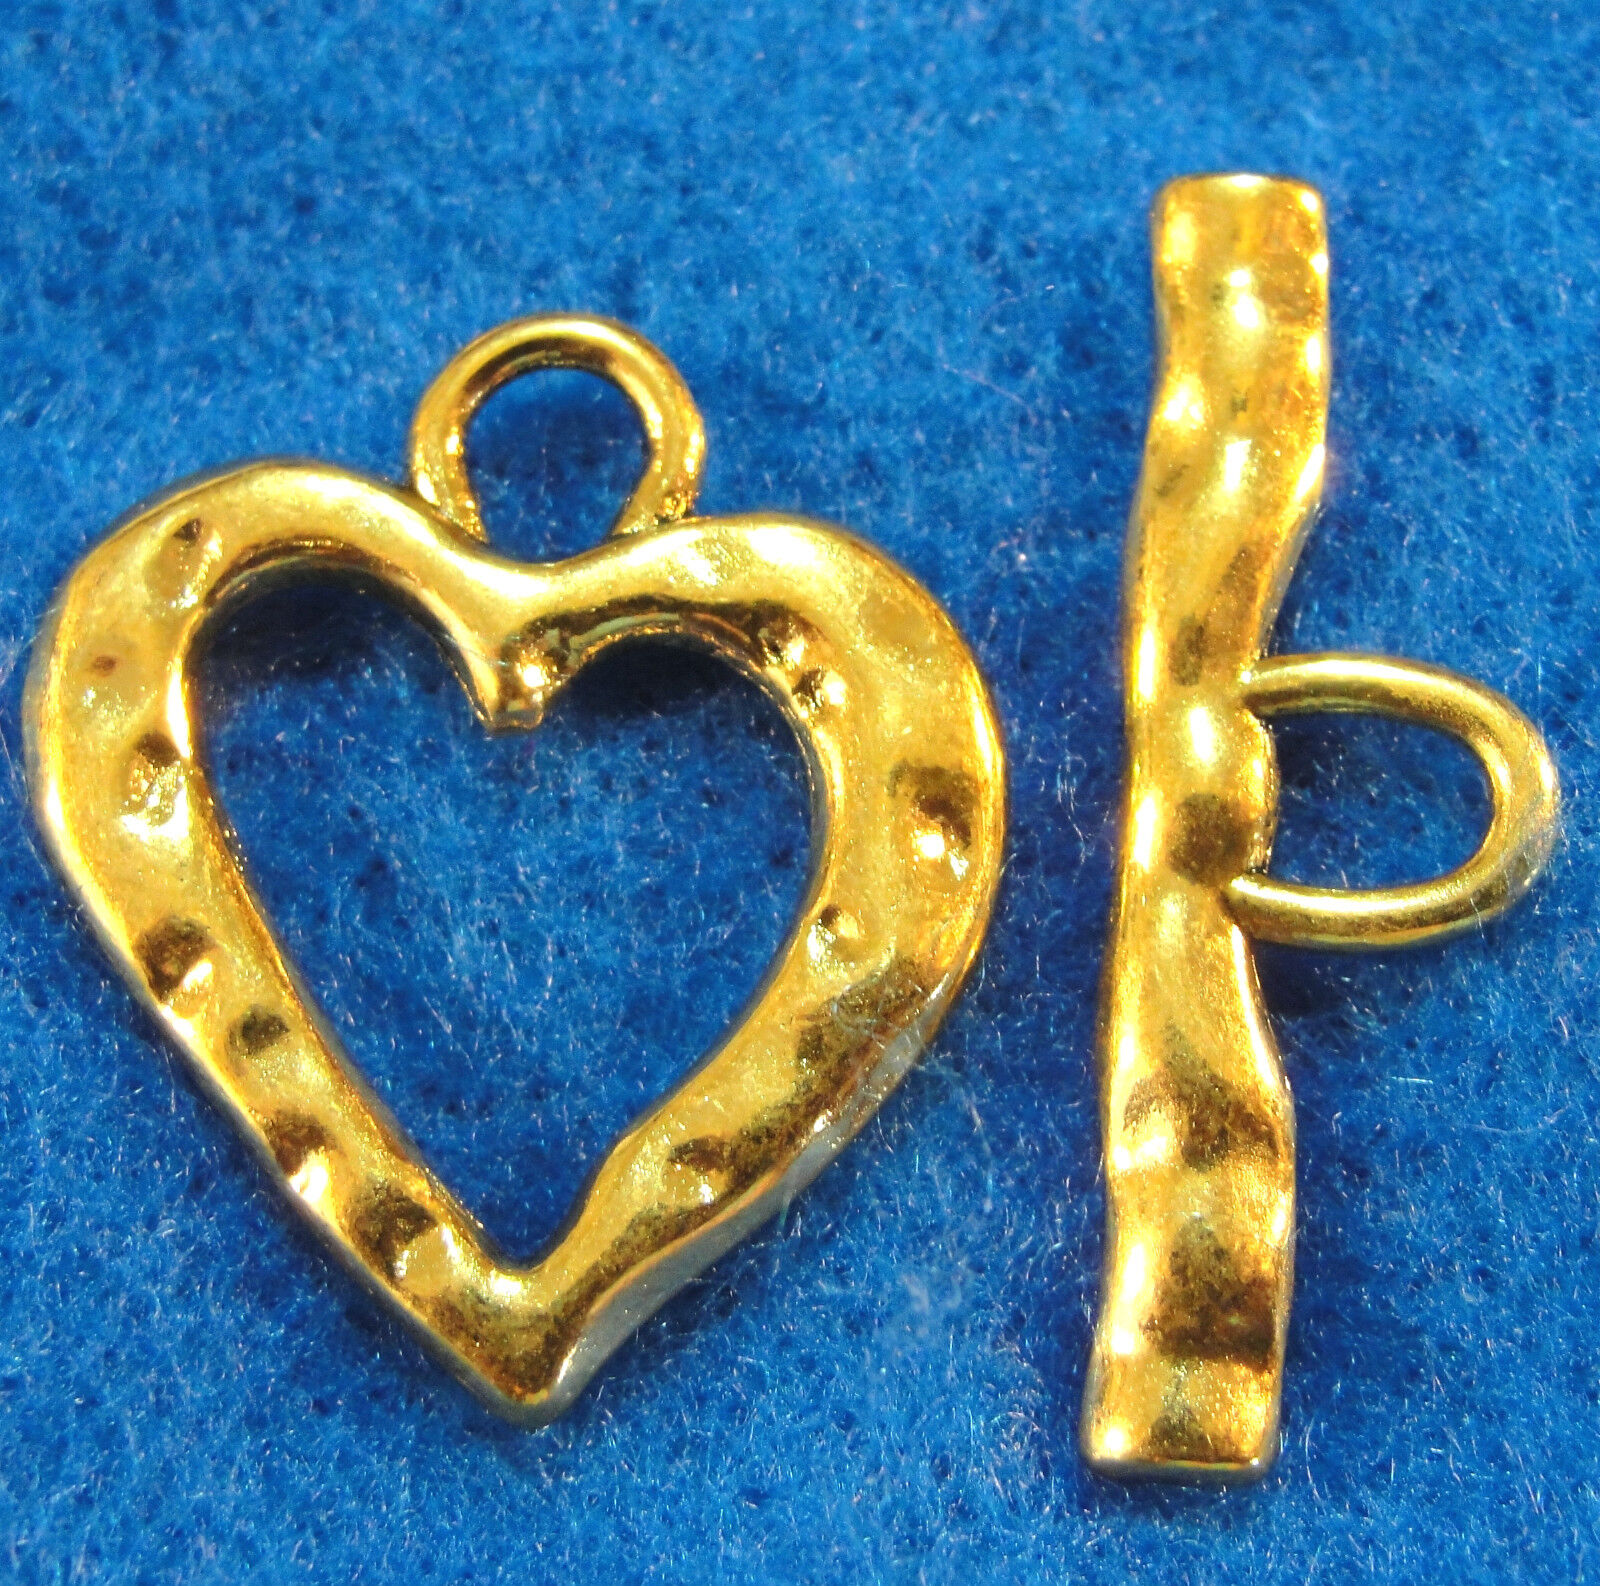 10 Sets Antique Gold Large HEART Toggle Clasps Connectors Tibetan Findings C359